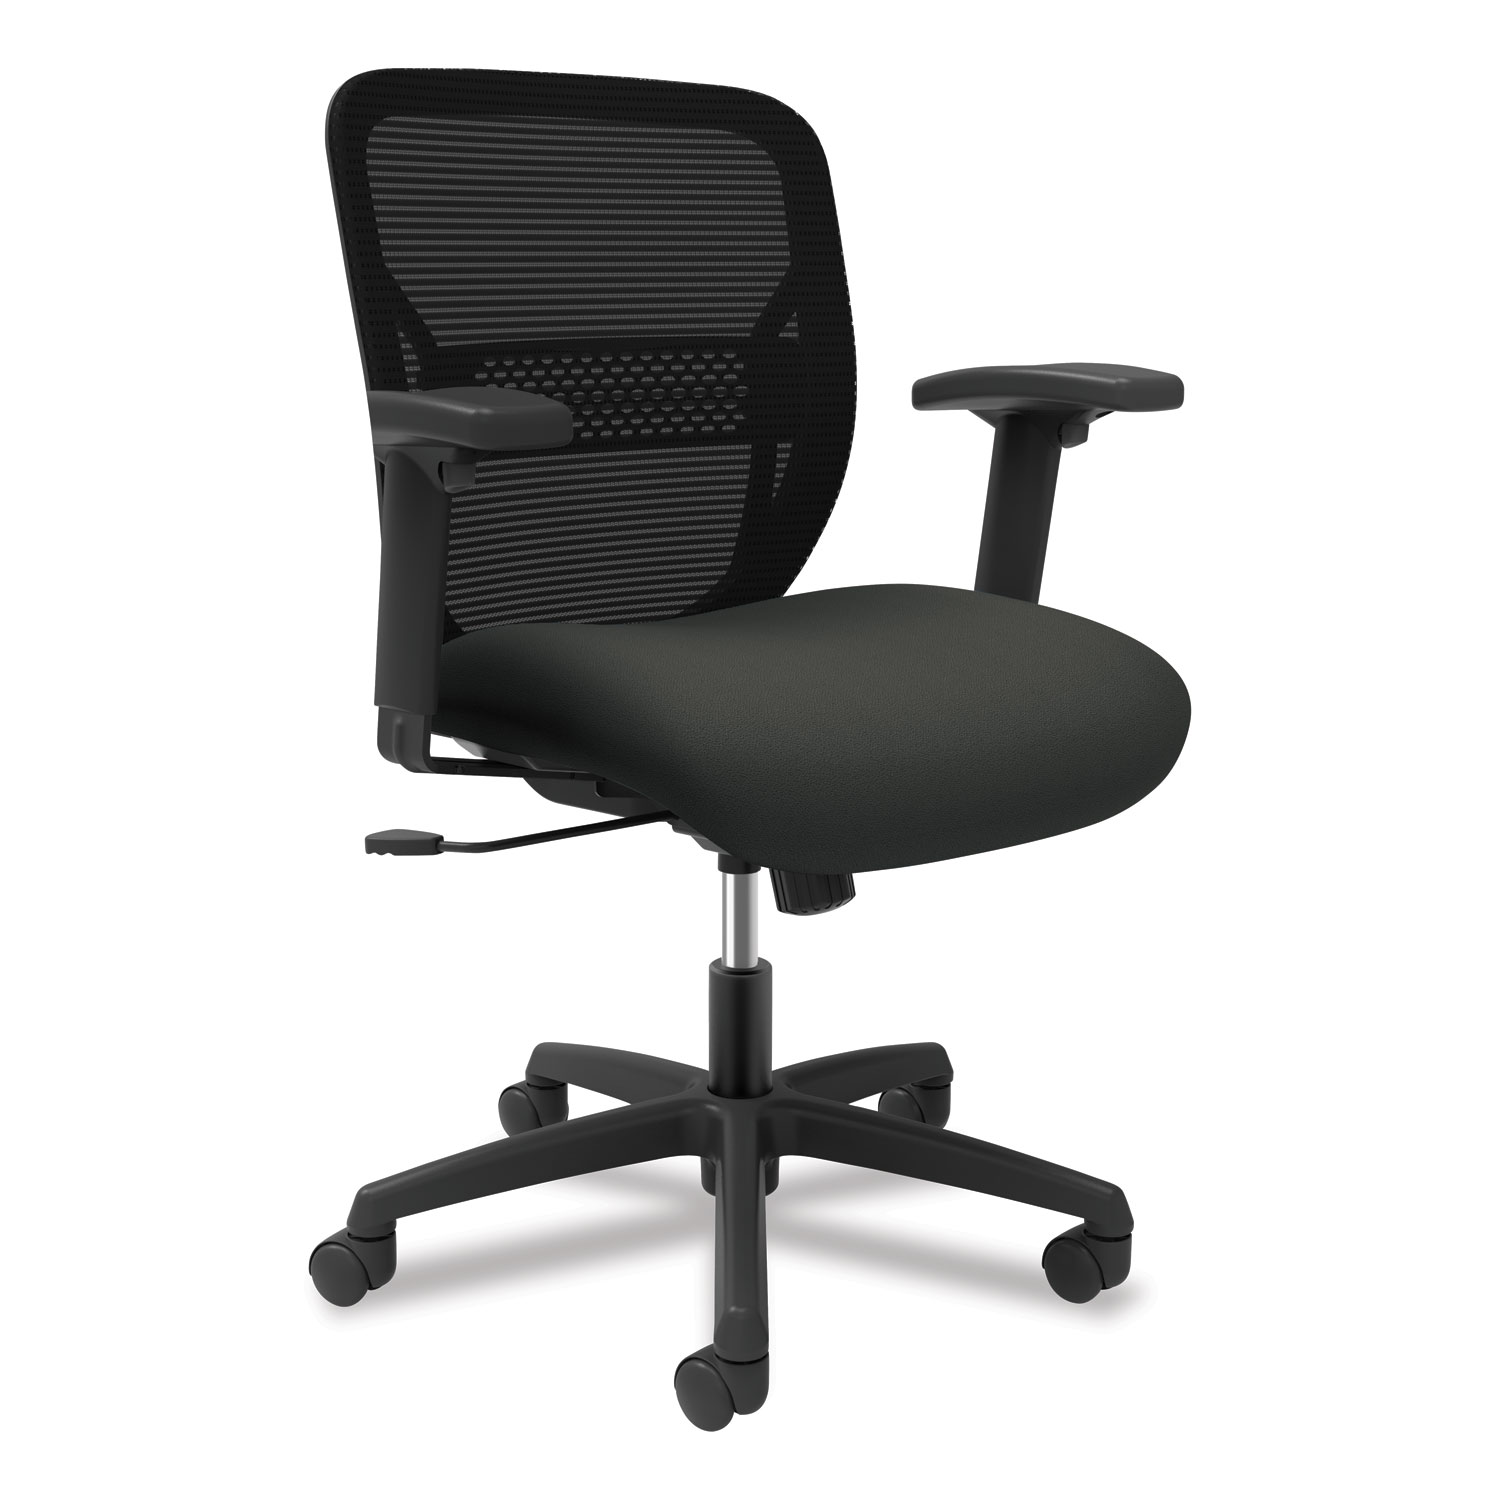  HON HONGTHMZ1CU19 Gateway Mid-Back Task Chair with Arms, Supports up to 250 lbs, Iron Ore Seat, Black Back, Black Base (HONGTHMZ1CU19) 